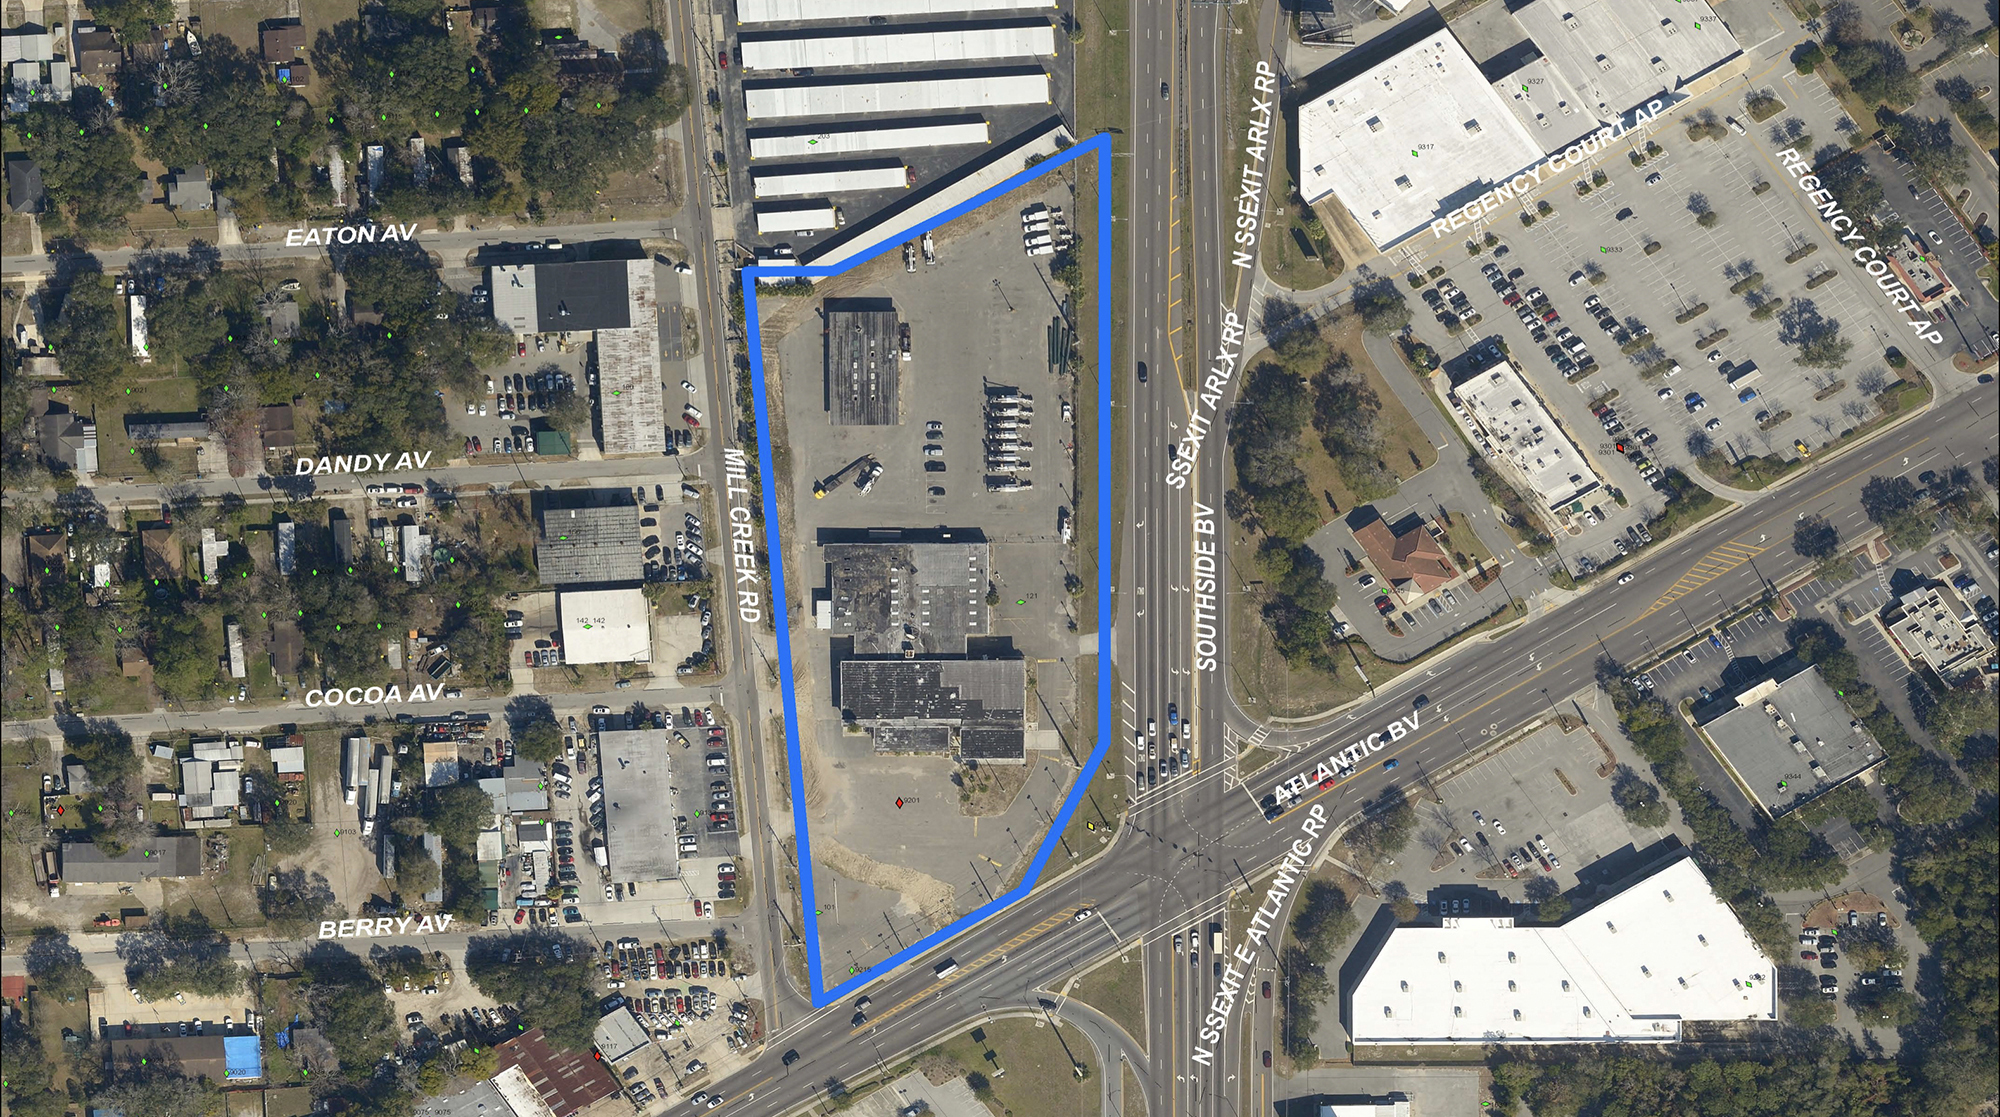 JEA will keep about 1 acre of the 5.08-acre property it sold to Circle K as a utility easement.